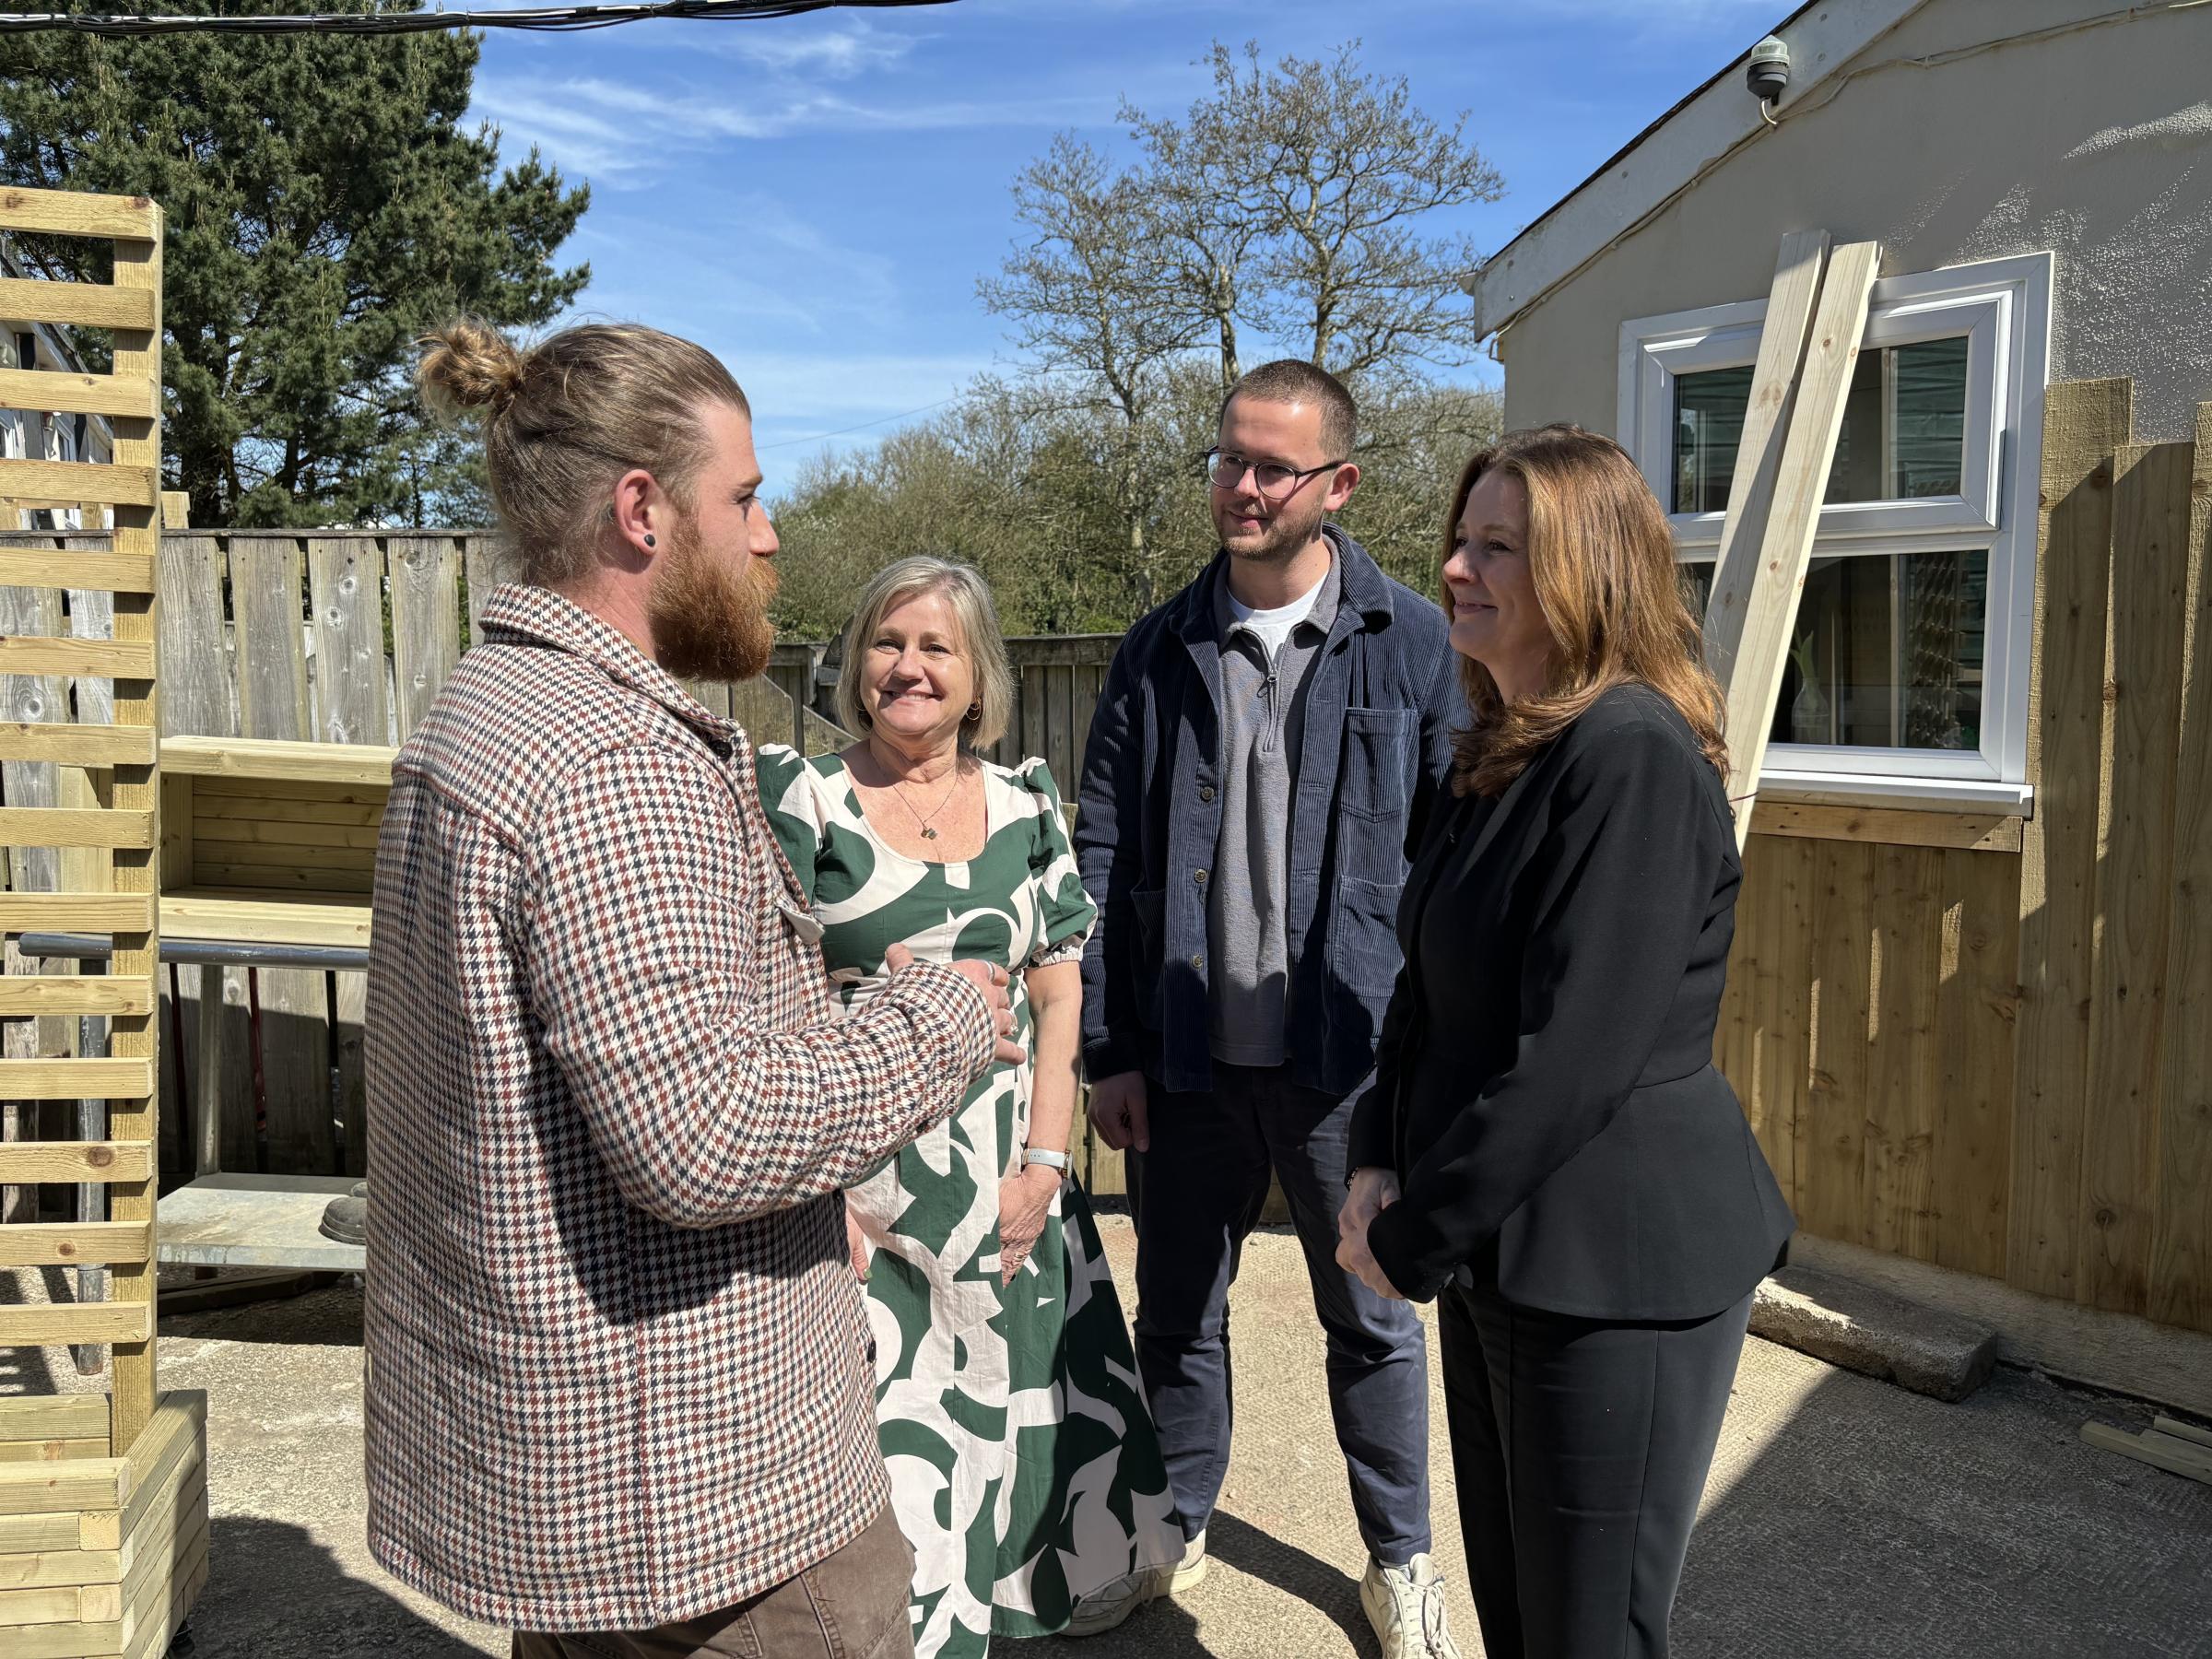 Education Secretary Gillian Keegan chats to Naturally Learning\s Tom Richardson alongside Mandy Richardson and the Conservative parliamentary candidate for Camborne and Redruth, Connor Donnithorne (Pic: Lee Trewhela / LDRS)